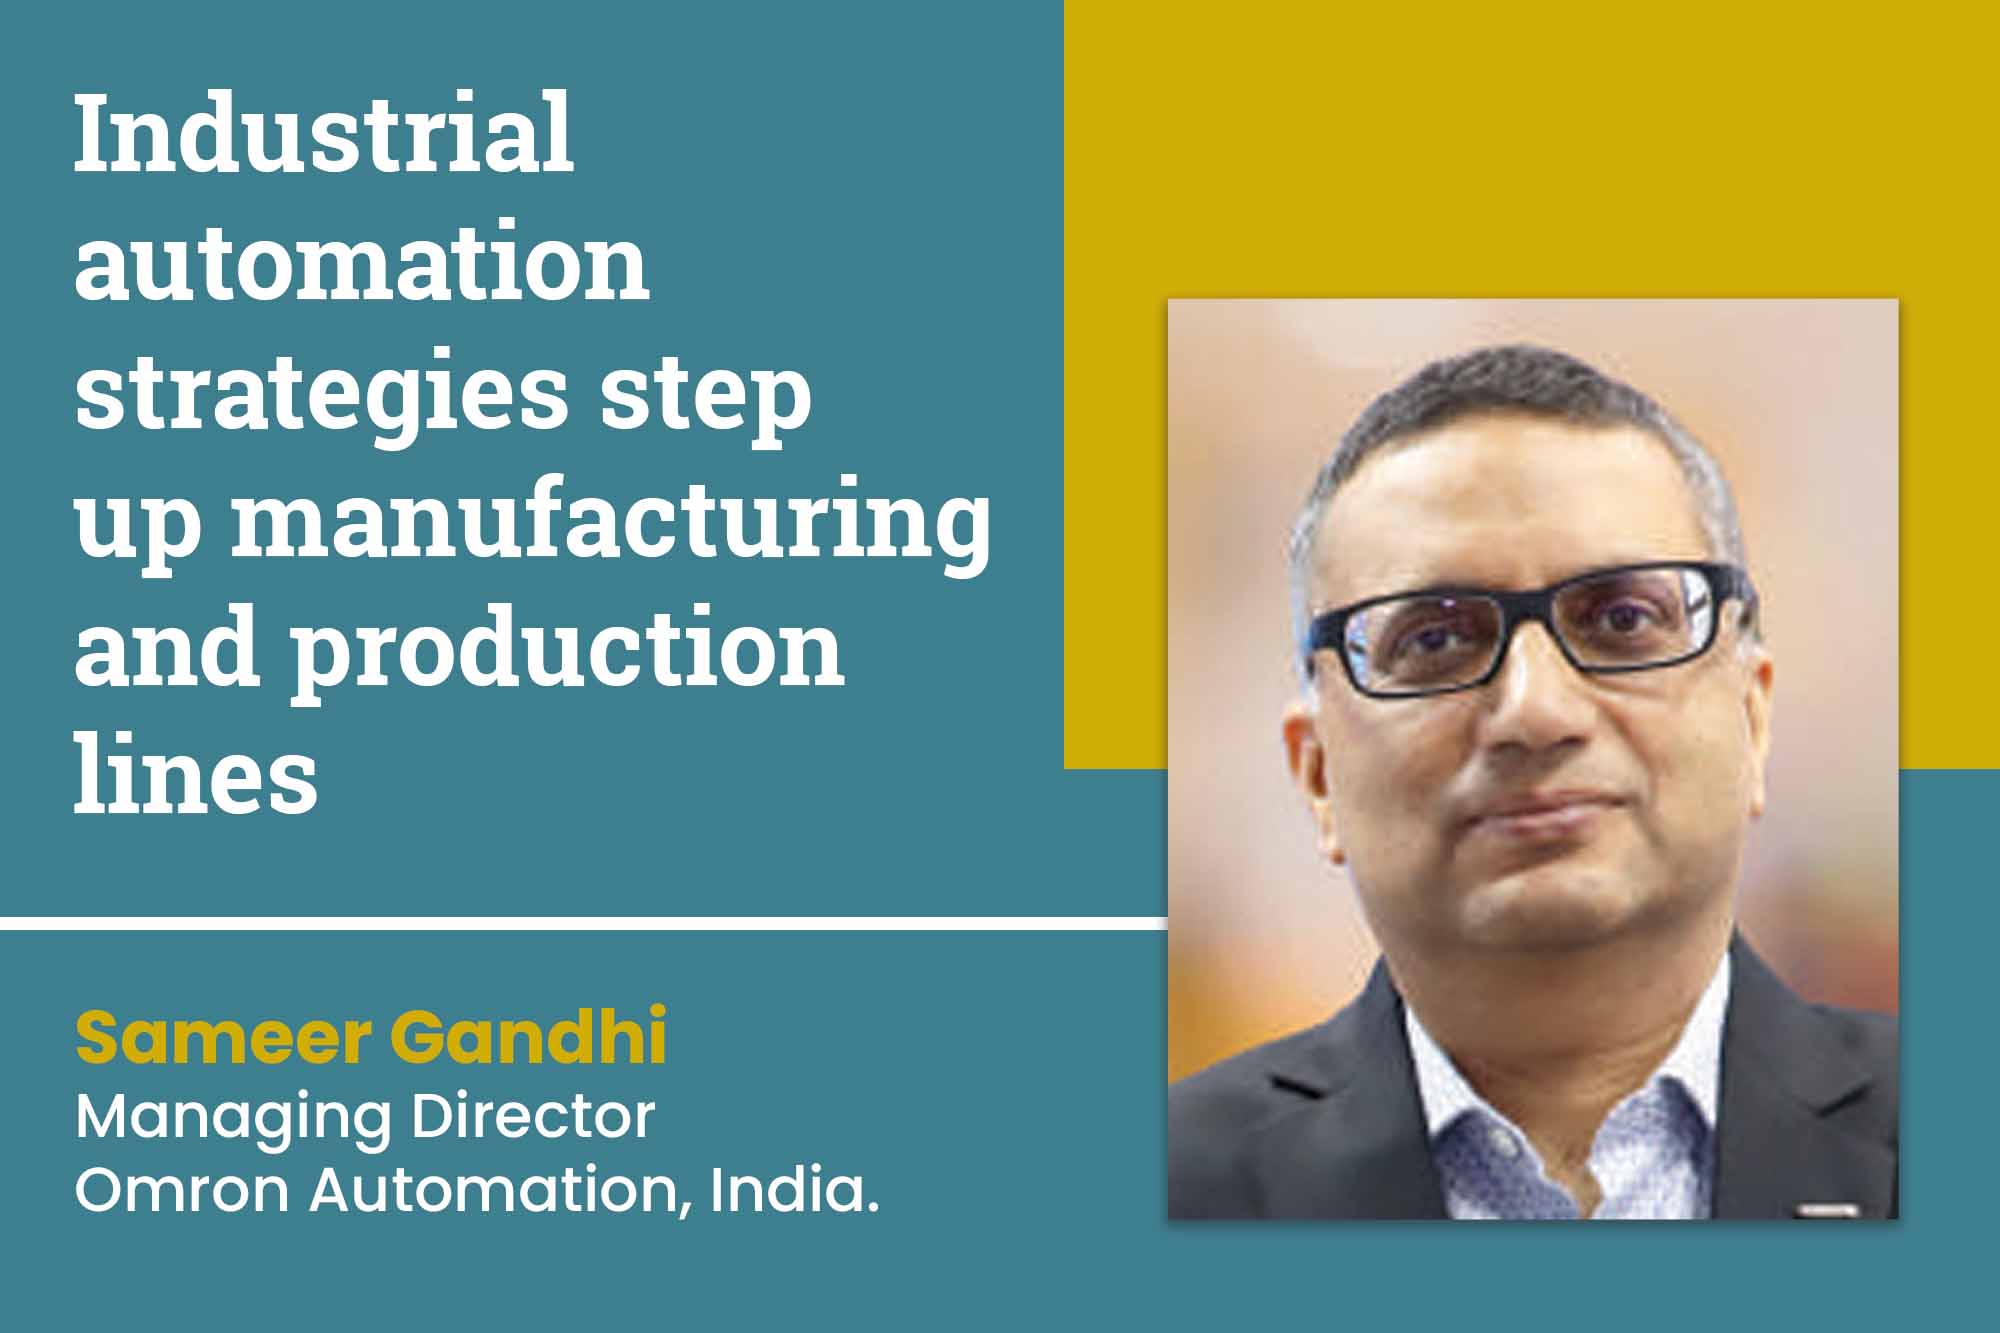 Industrial automation strategies step up manufacturing and production lines